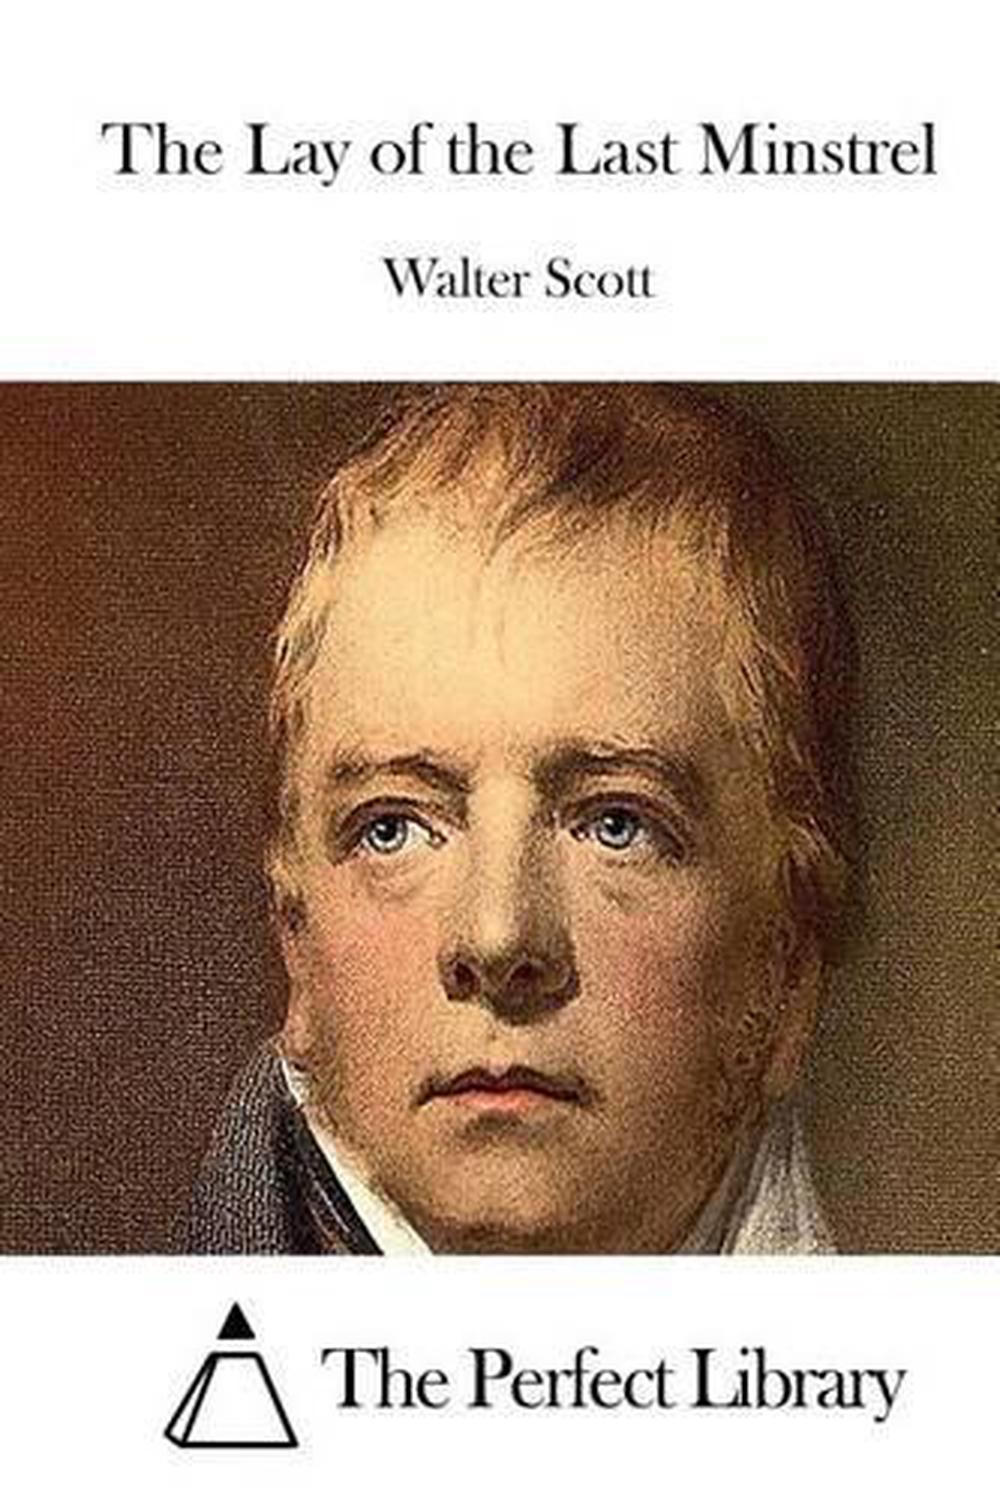 The Lay of the Last Minstrel by Walter Scott (English) Paperback Book ...